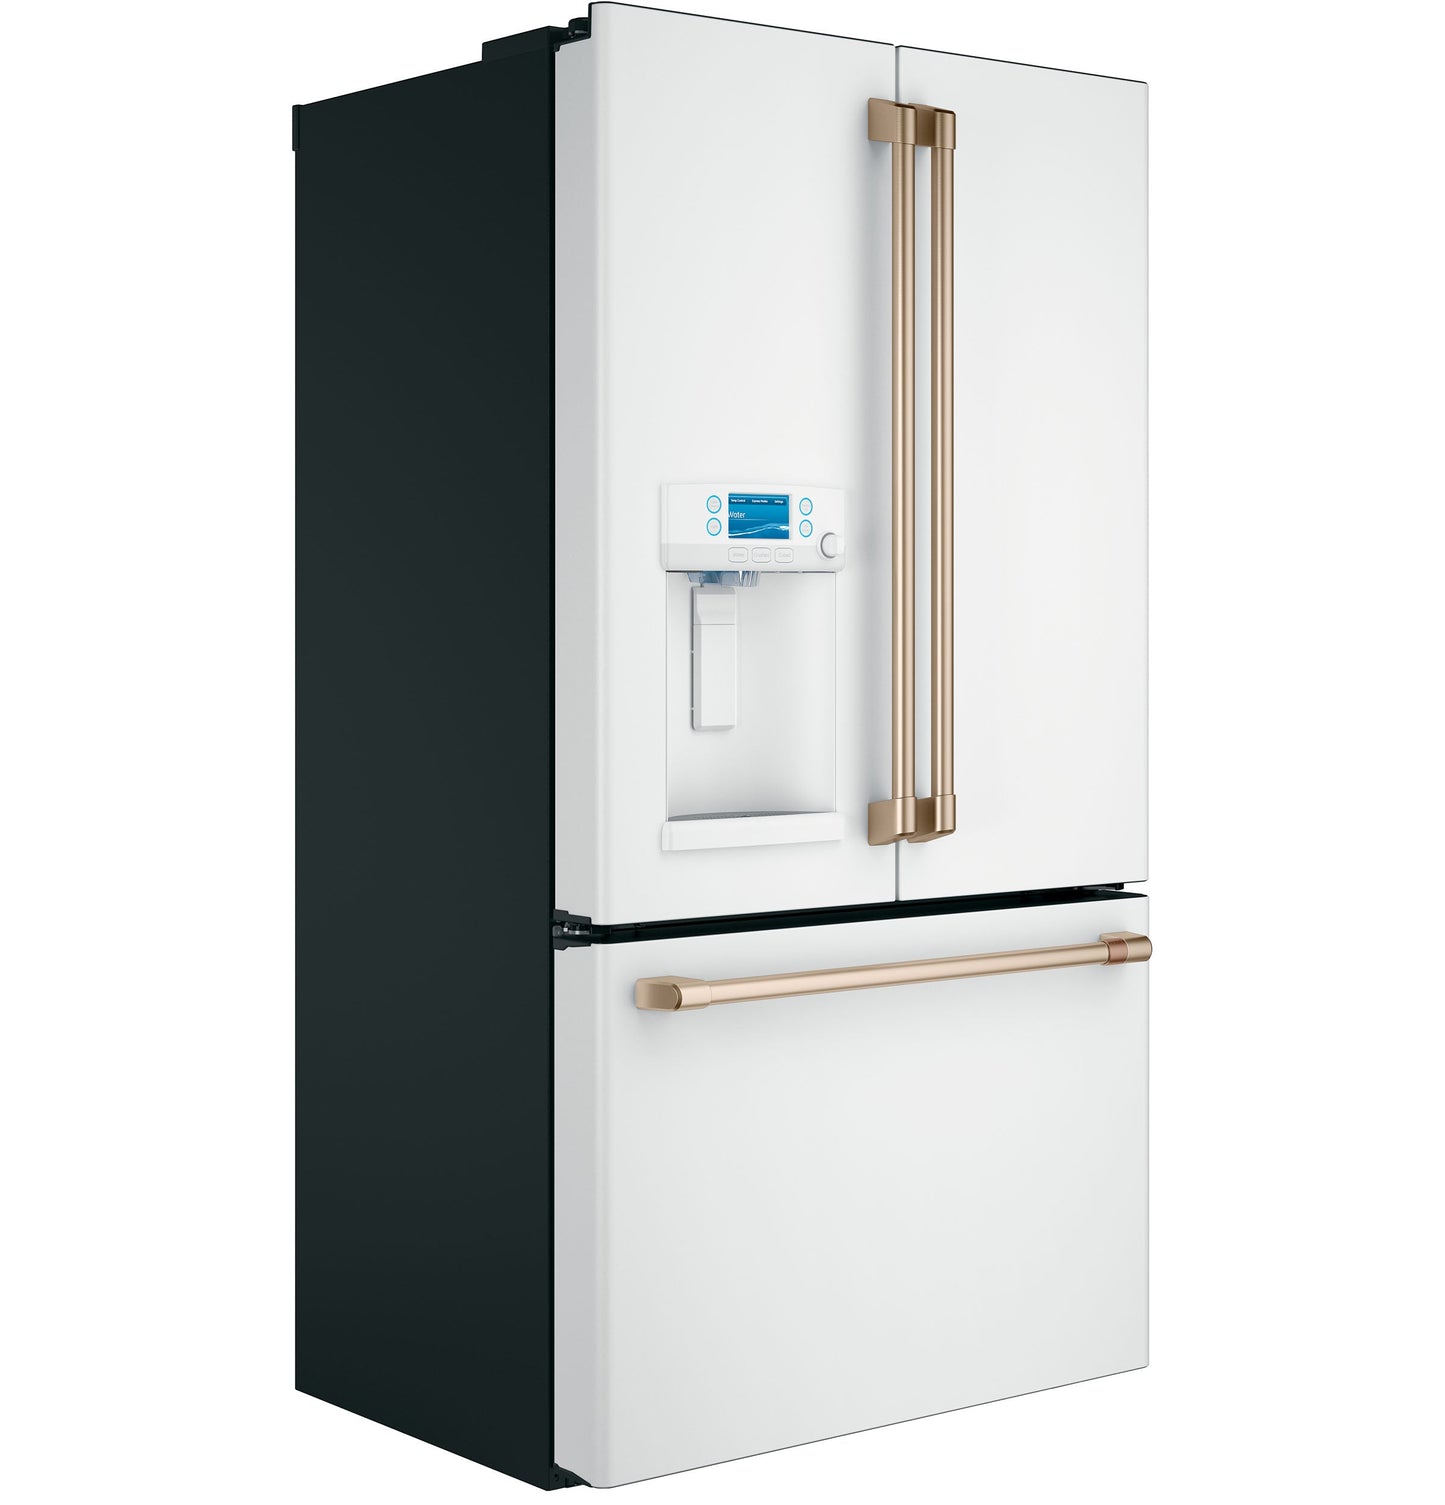 Café 22.2 Cu. Ft. Counter-Depth French-Door Refrigerator with Hot Water Dispenser Matte White - CYE22TP4MW2